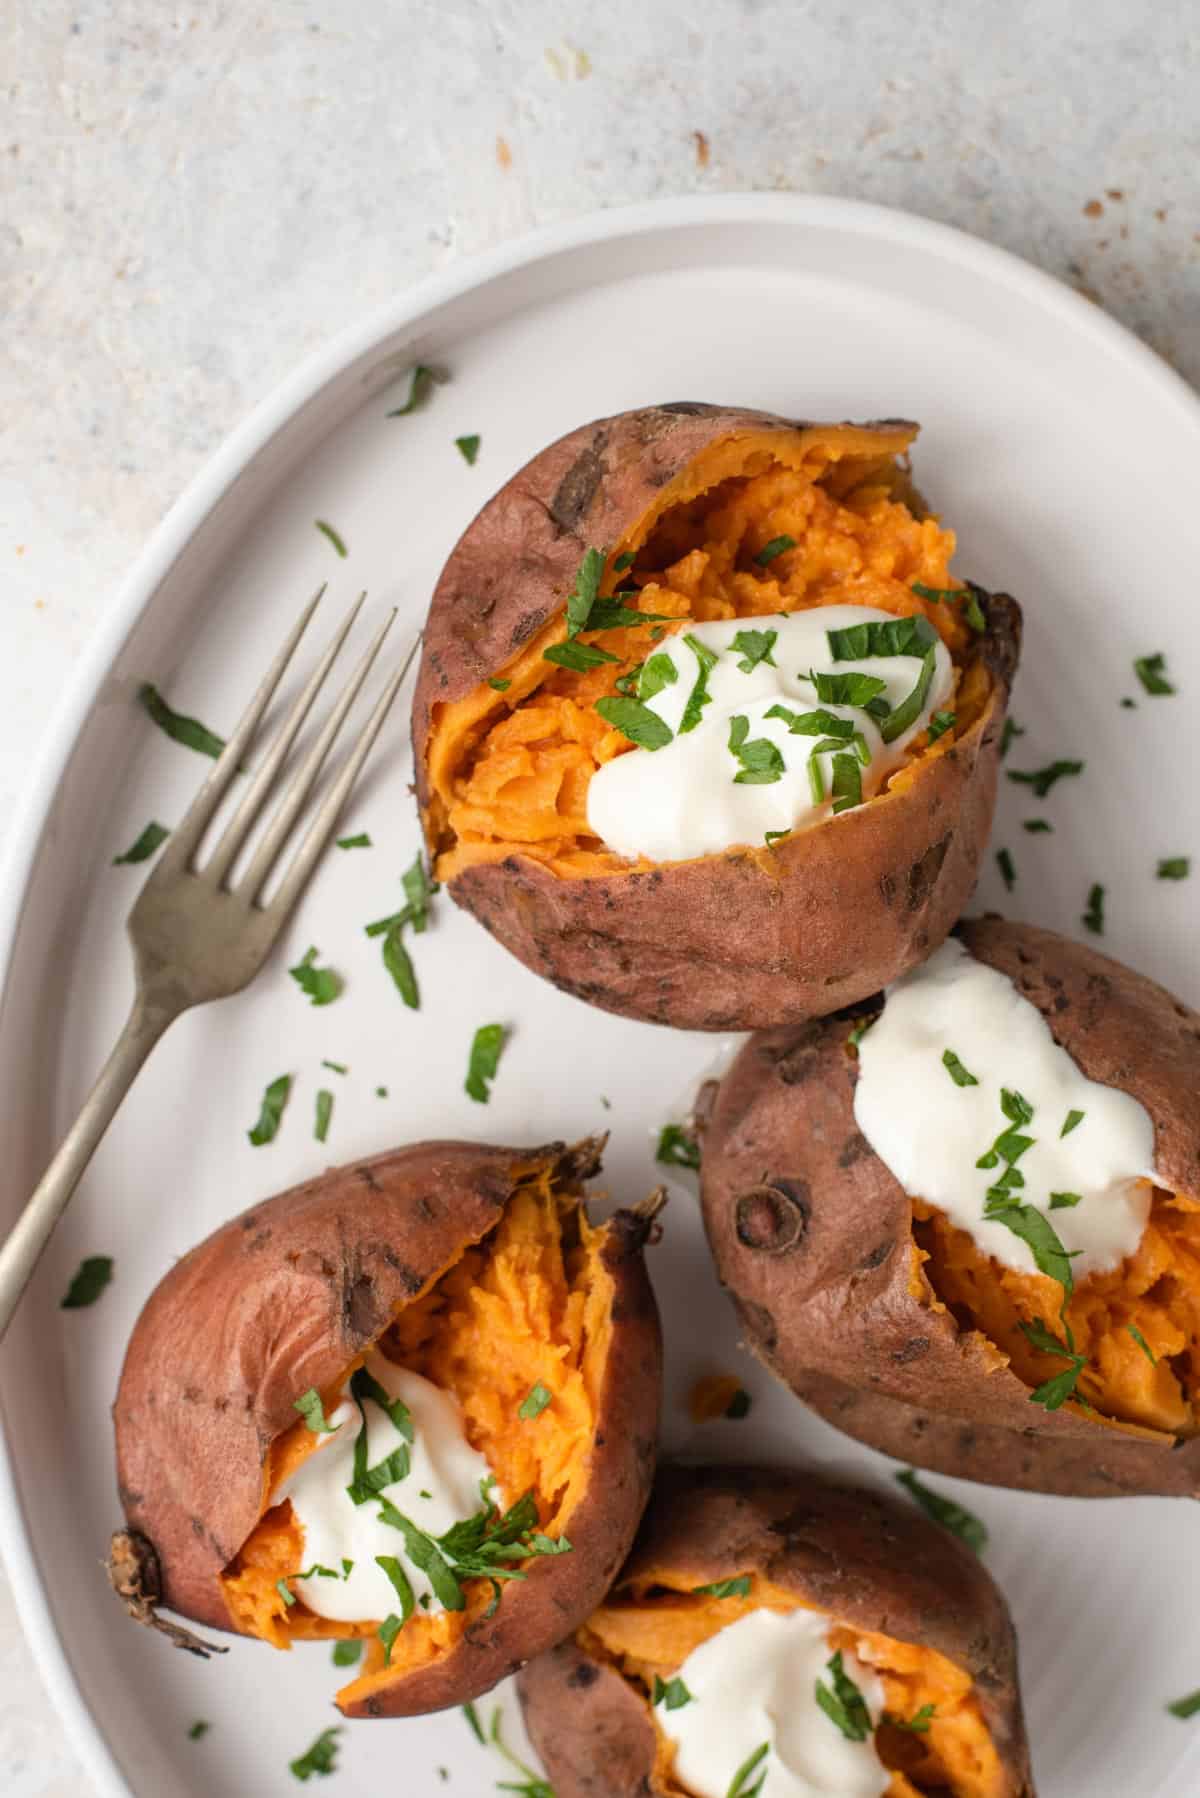 A close up of sweet potatoes topped with sour cream and herbs